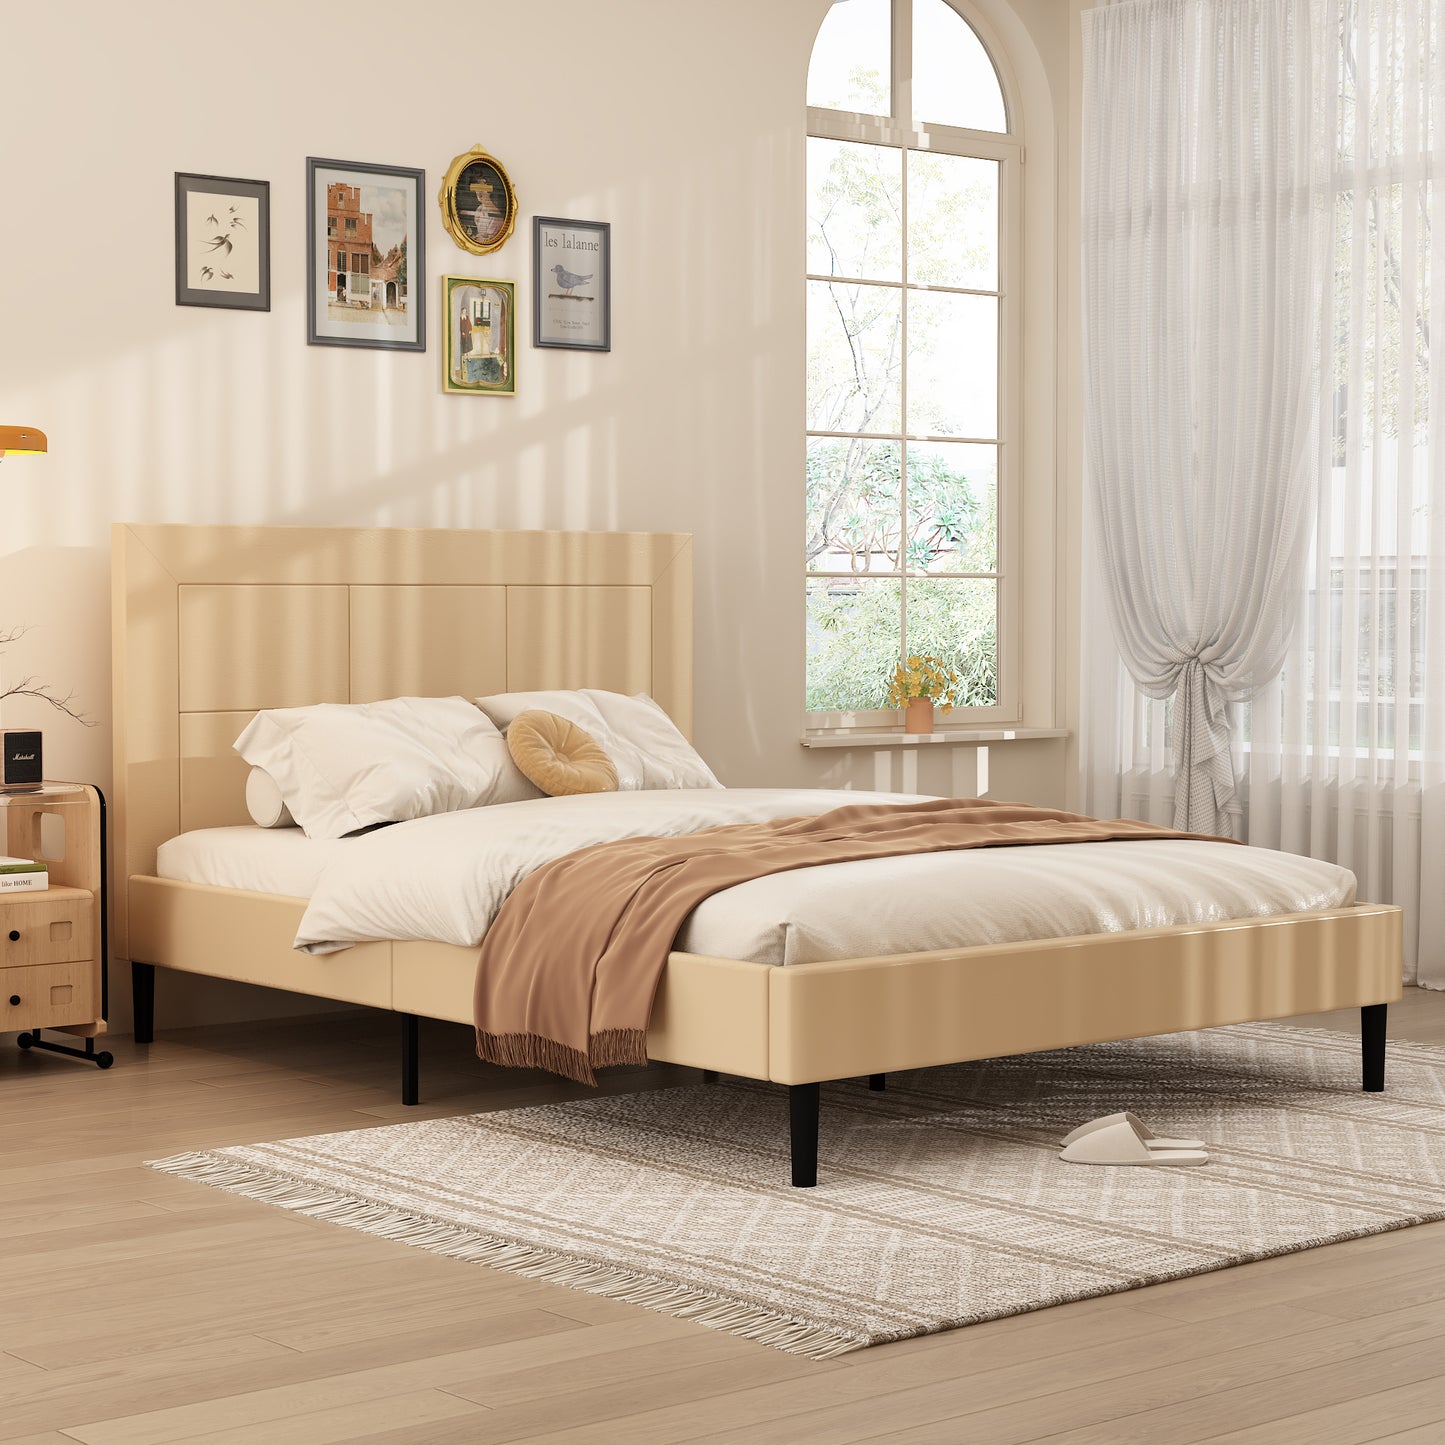 Waytrim wood frame PU leather two-section bed